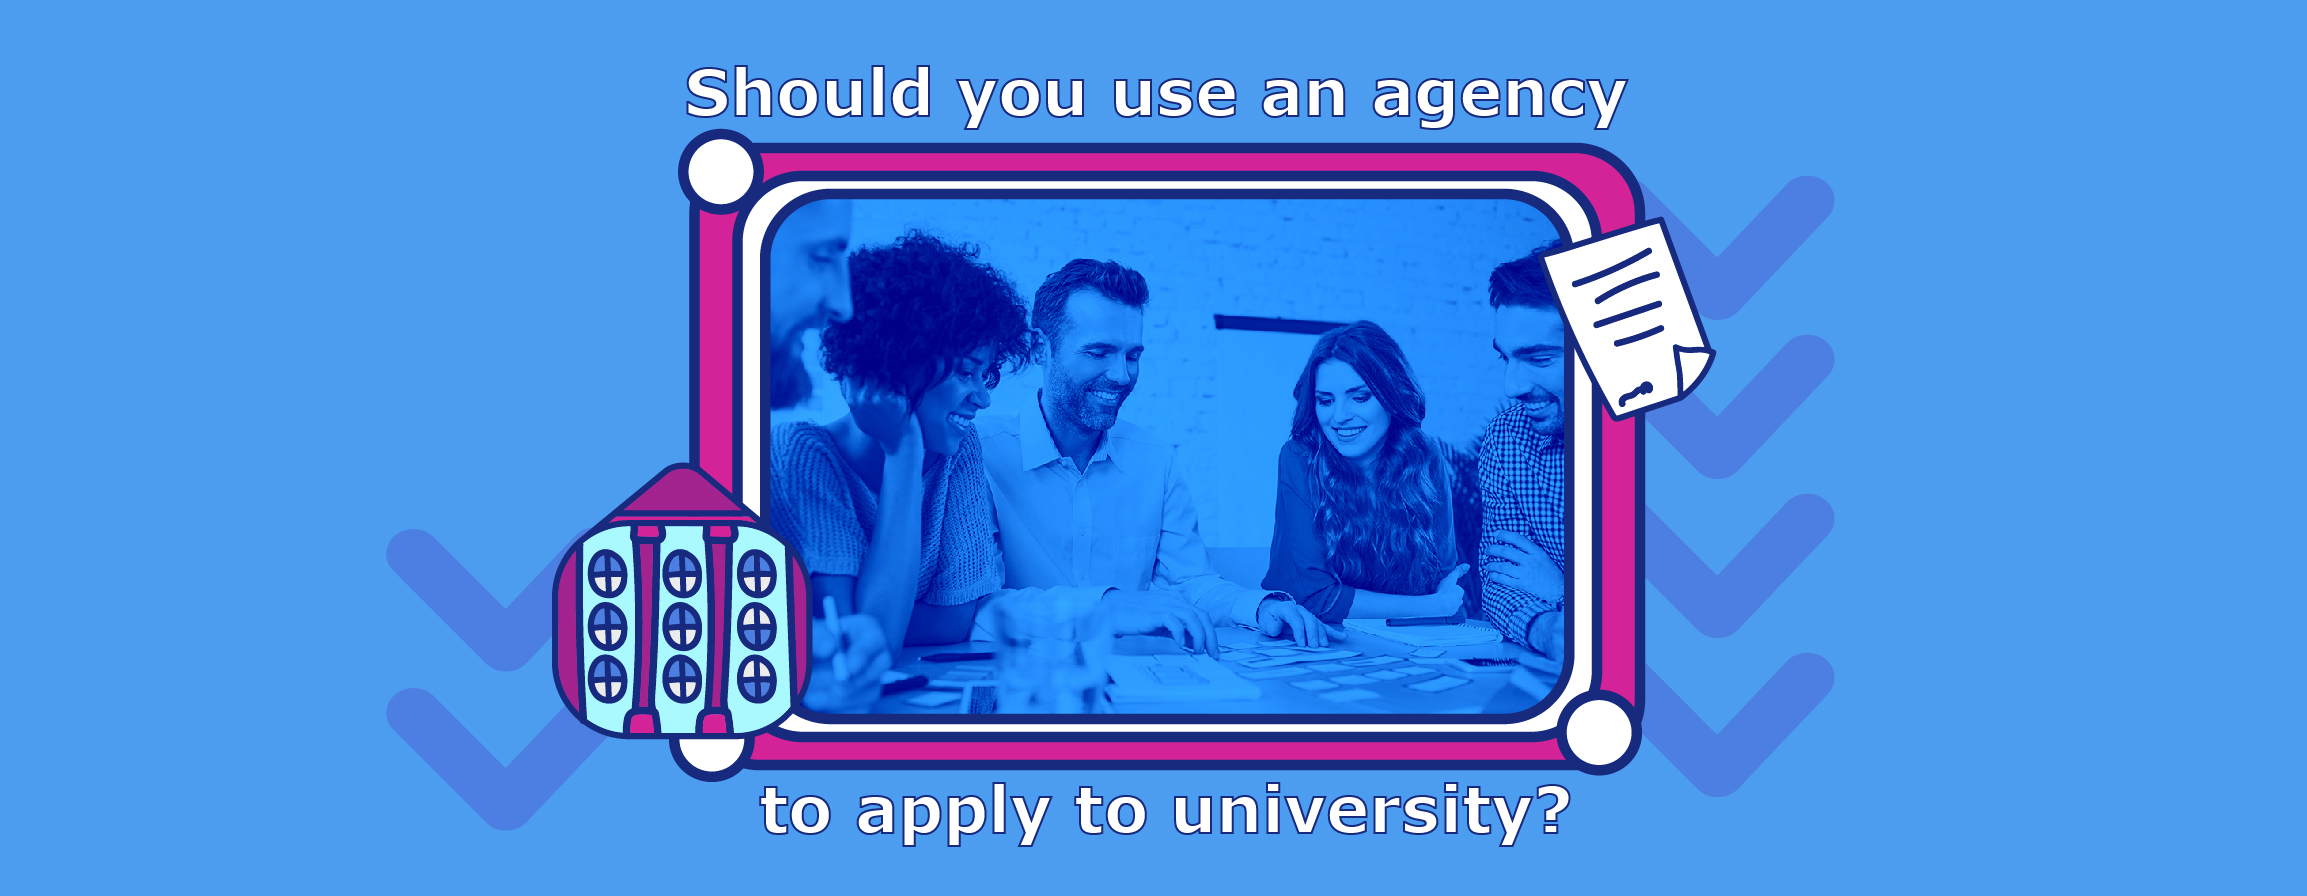 Should You Use an Agency to Apply to University?